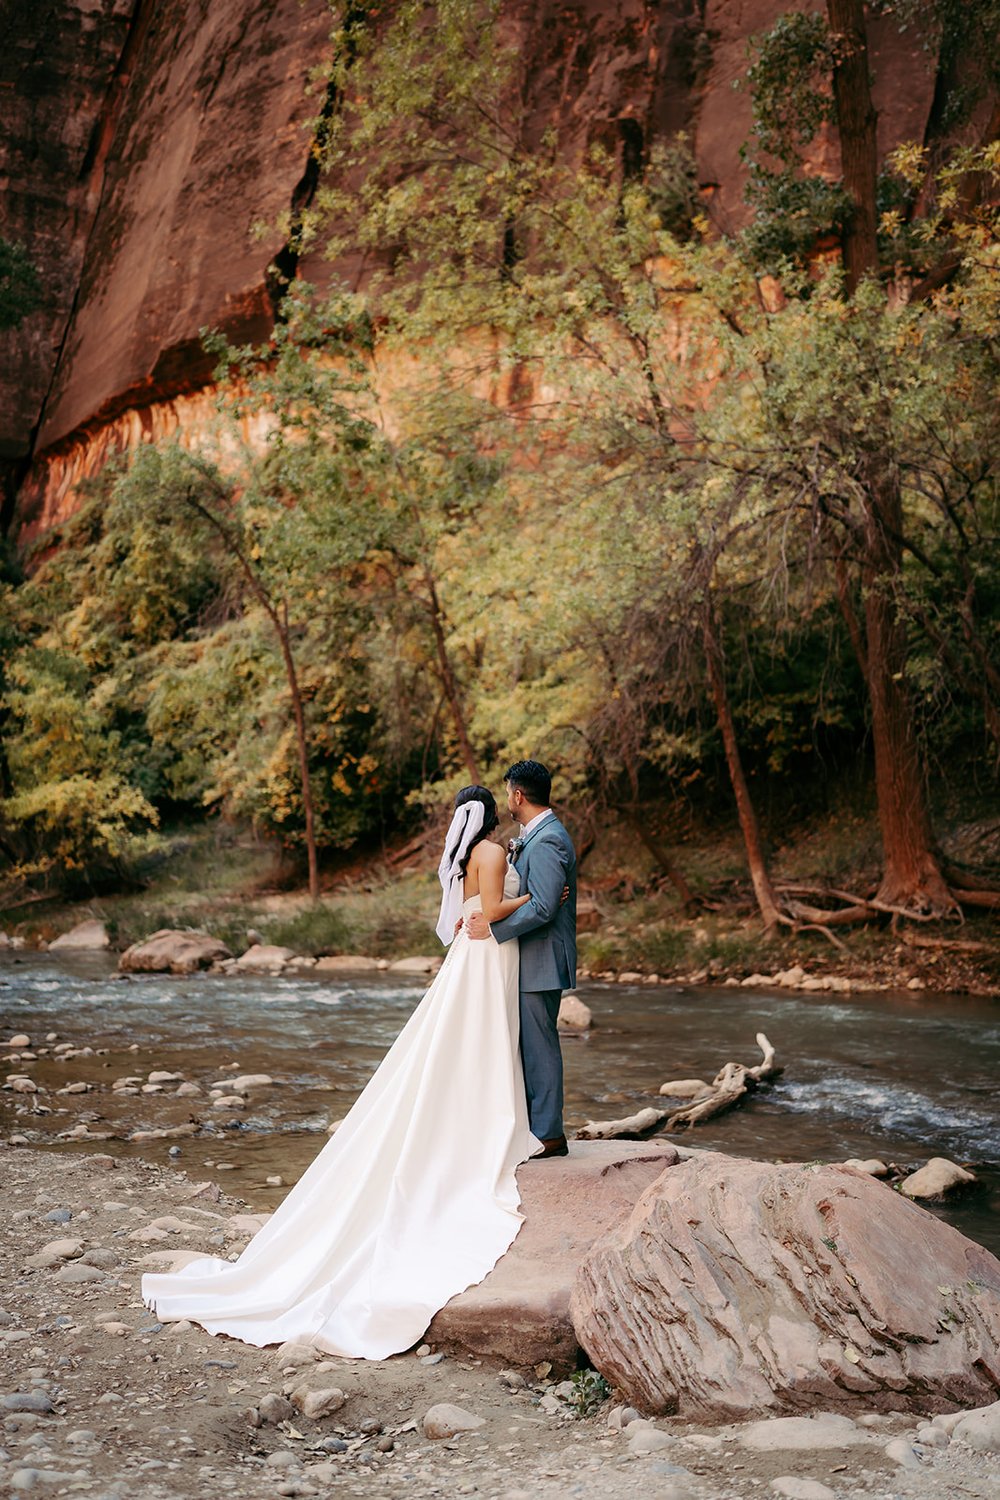  A dreamy elopement day at Zion National Park 